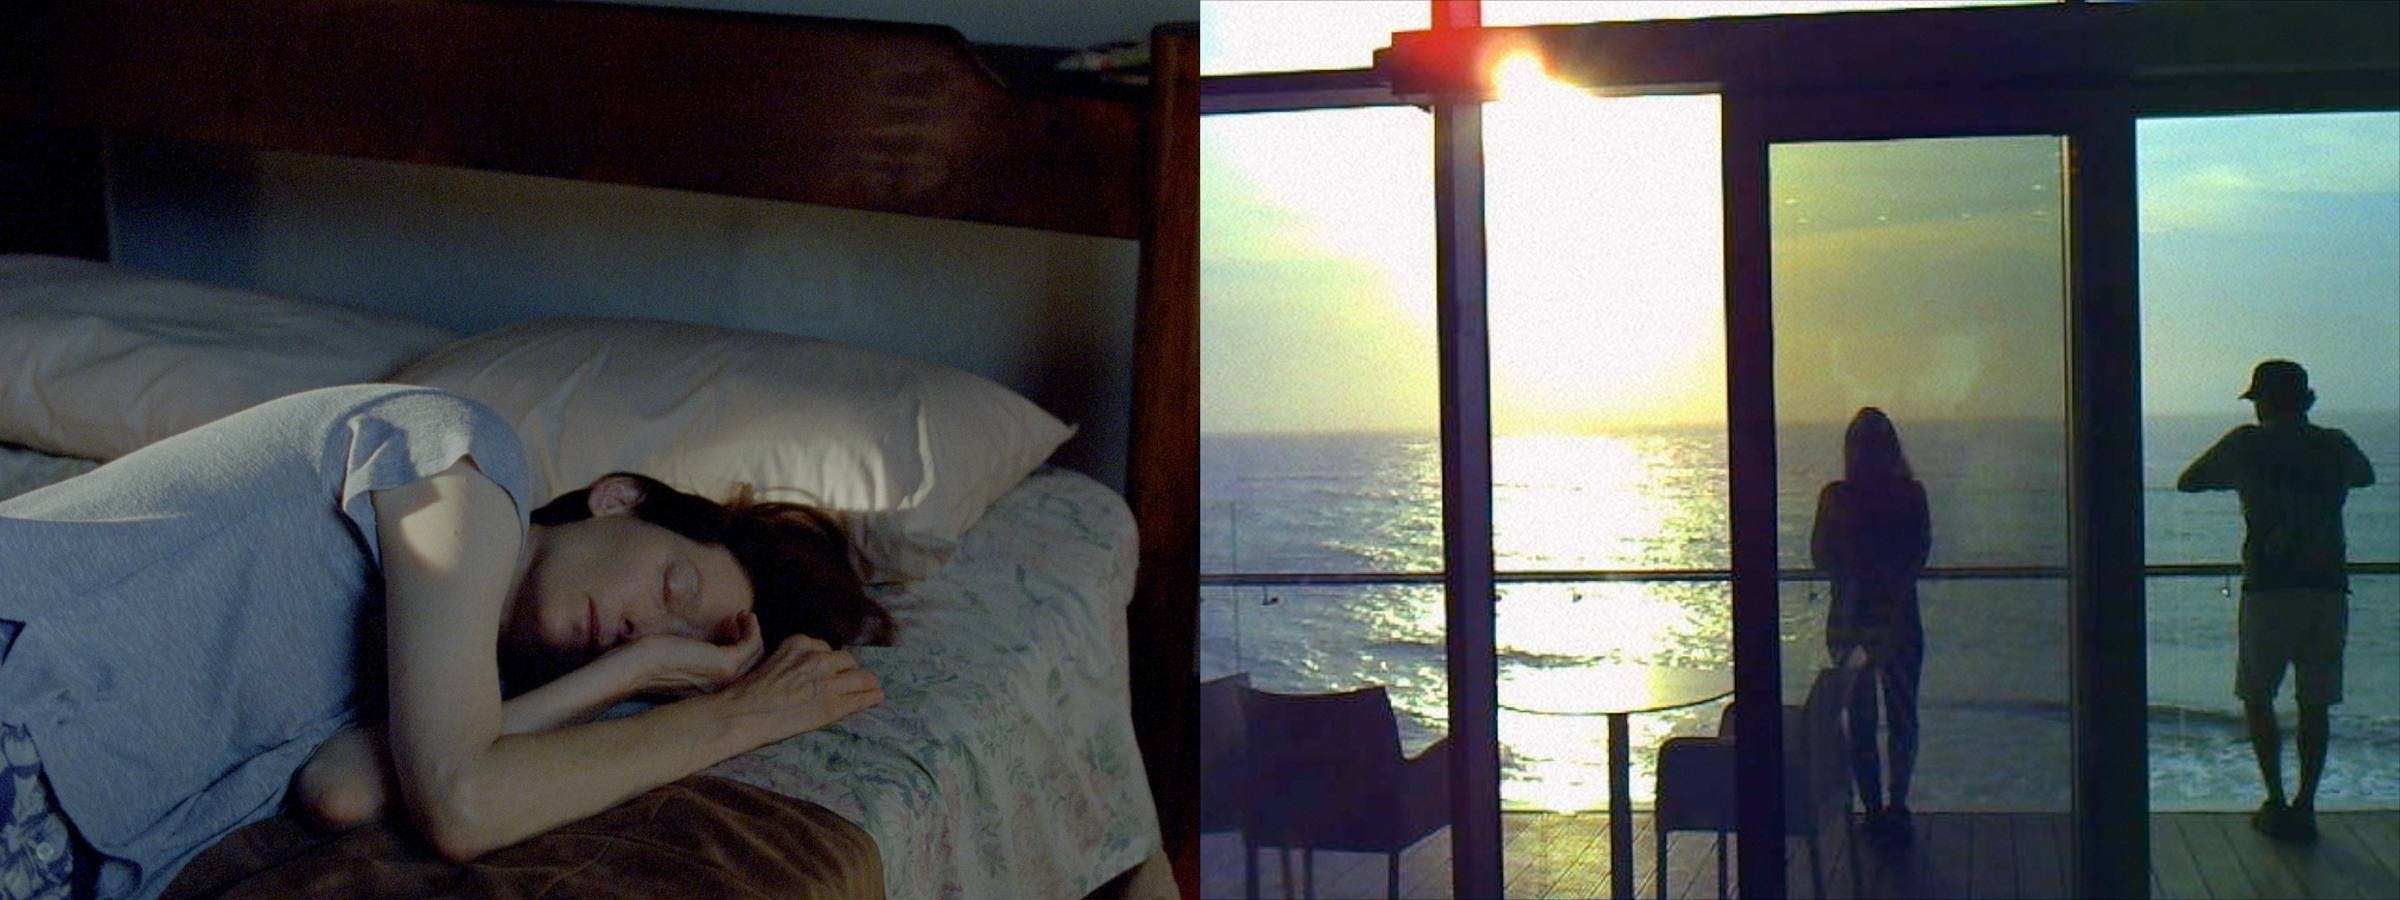 A split screen projection. On the left we can see a person sleeping, on the right we can see 2 people standing on a balcony watching the sun set